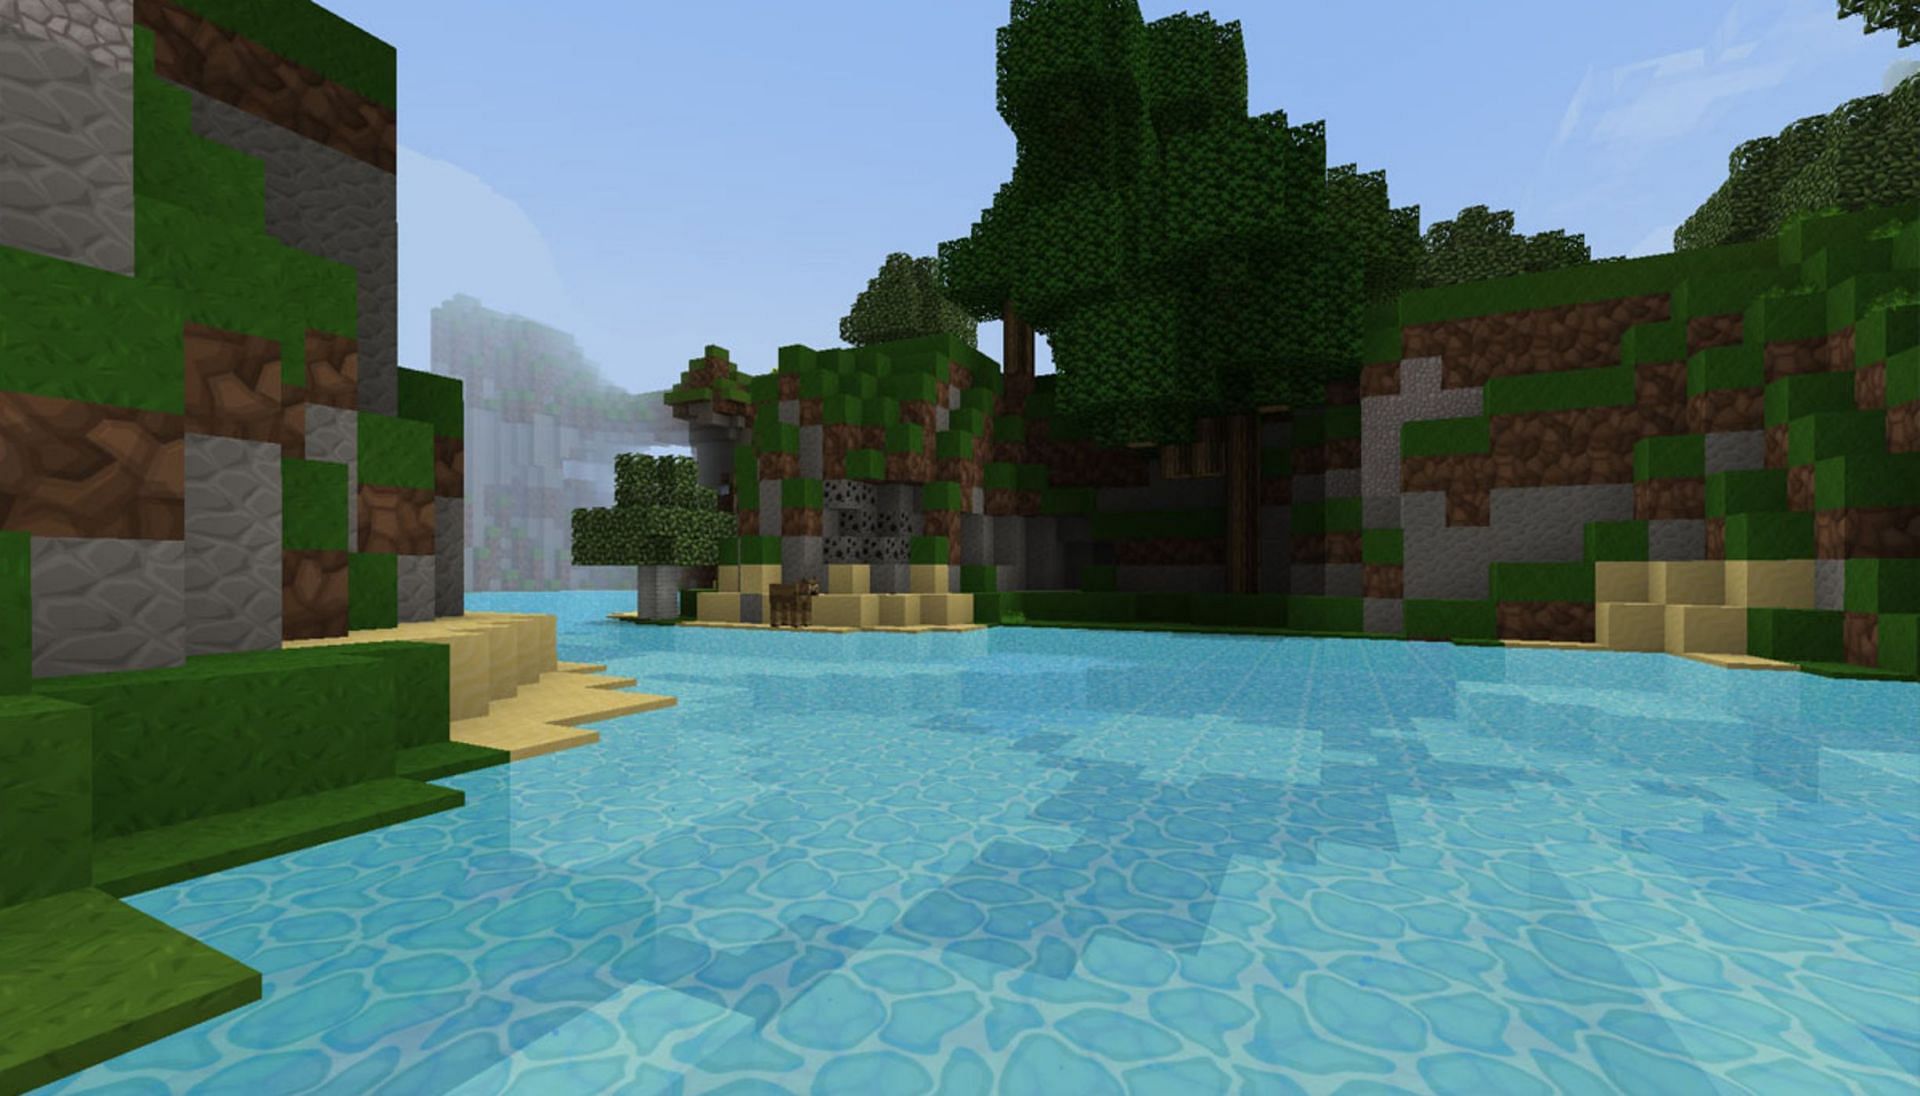 Sphax PureBDCraft brings a patterned texture to the water&#039;s surface (Image via Minecraft XL)